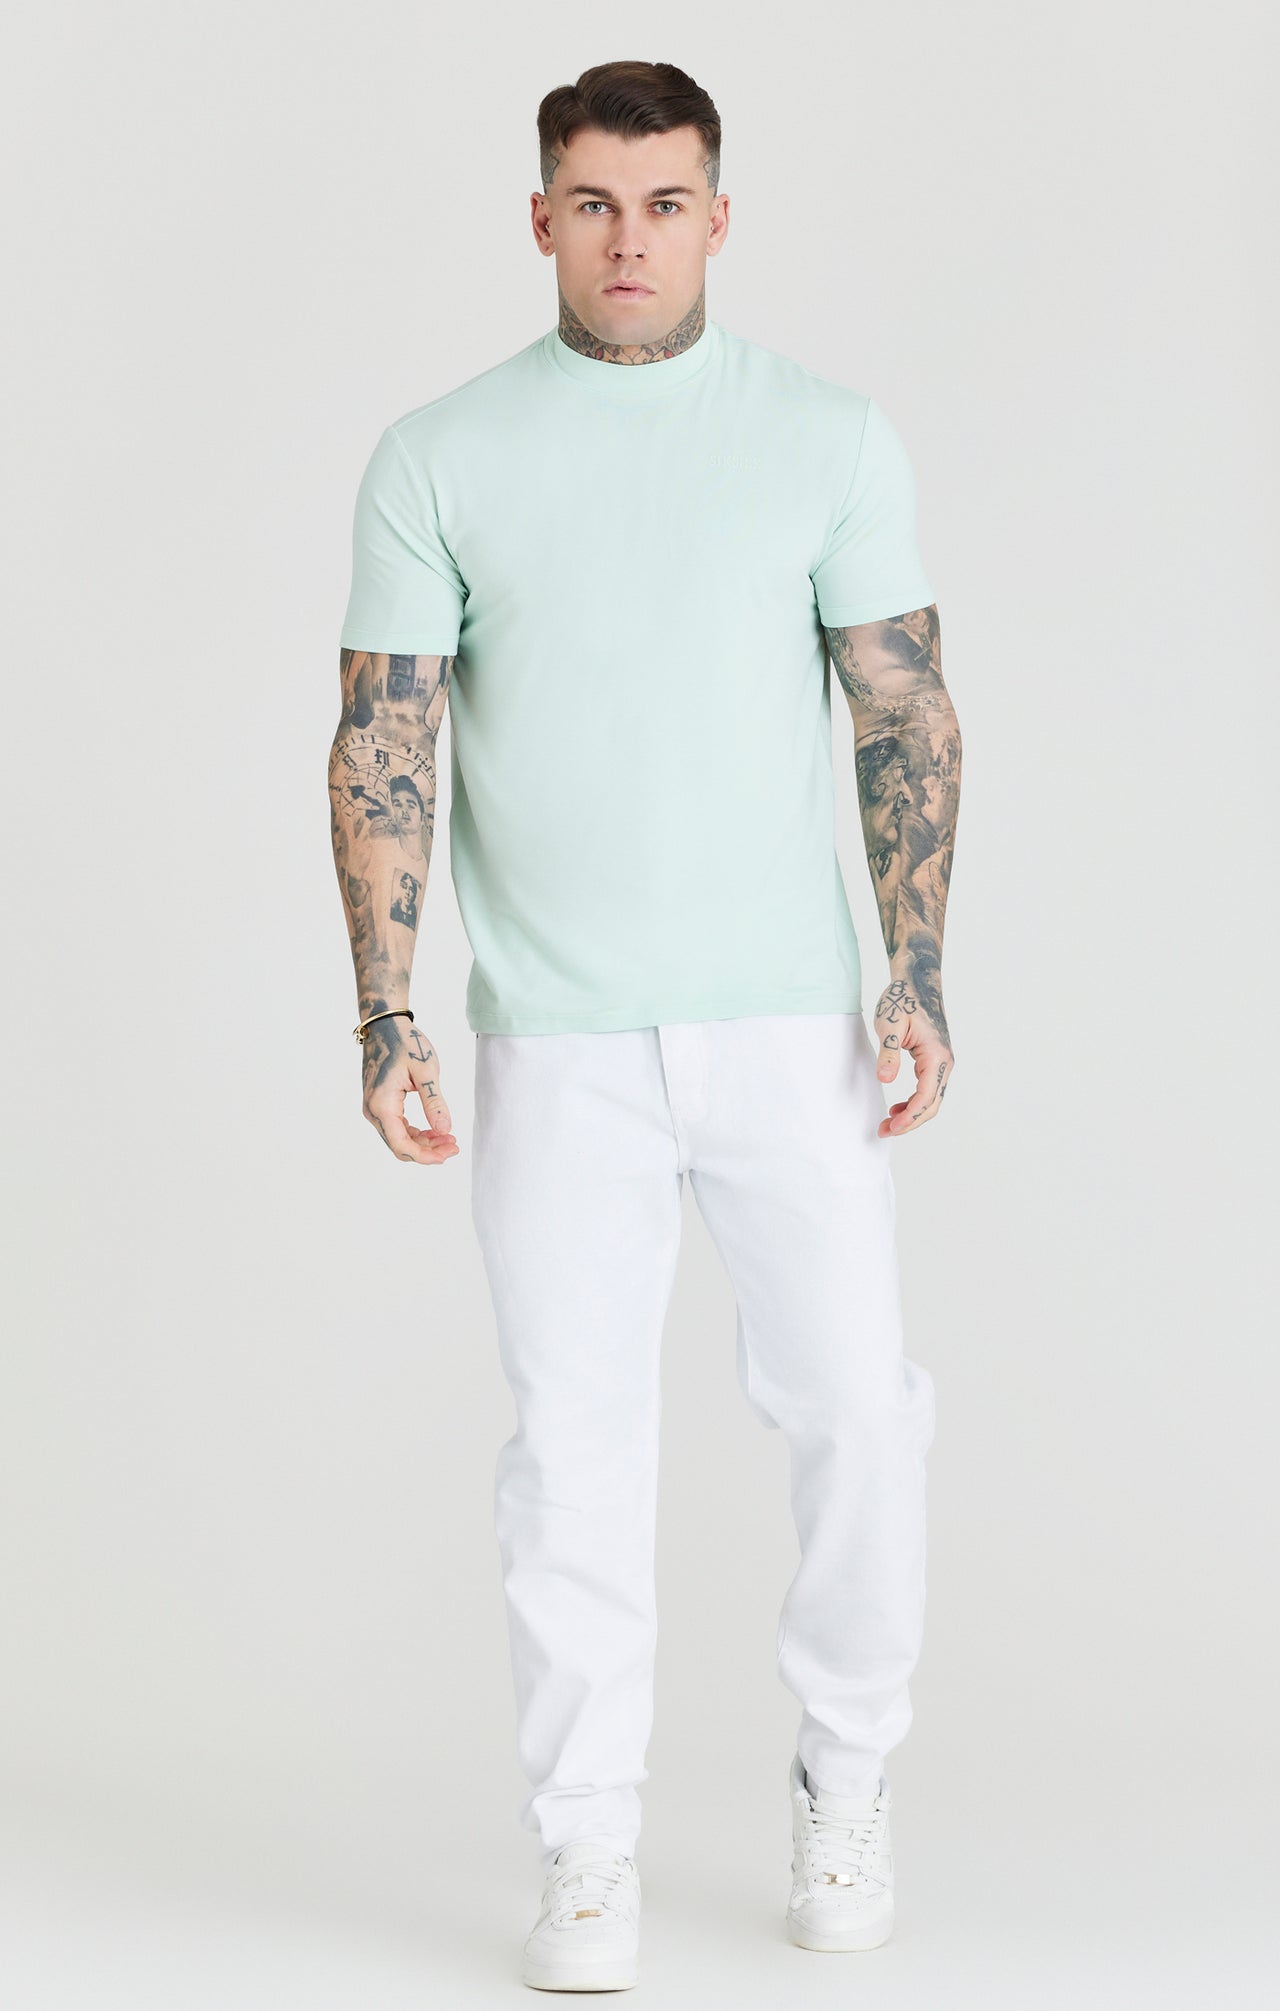 Teal High Neck Viscose Muscle Fit T-Shirt (2)